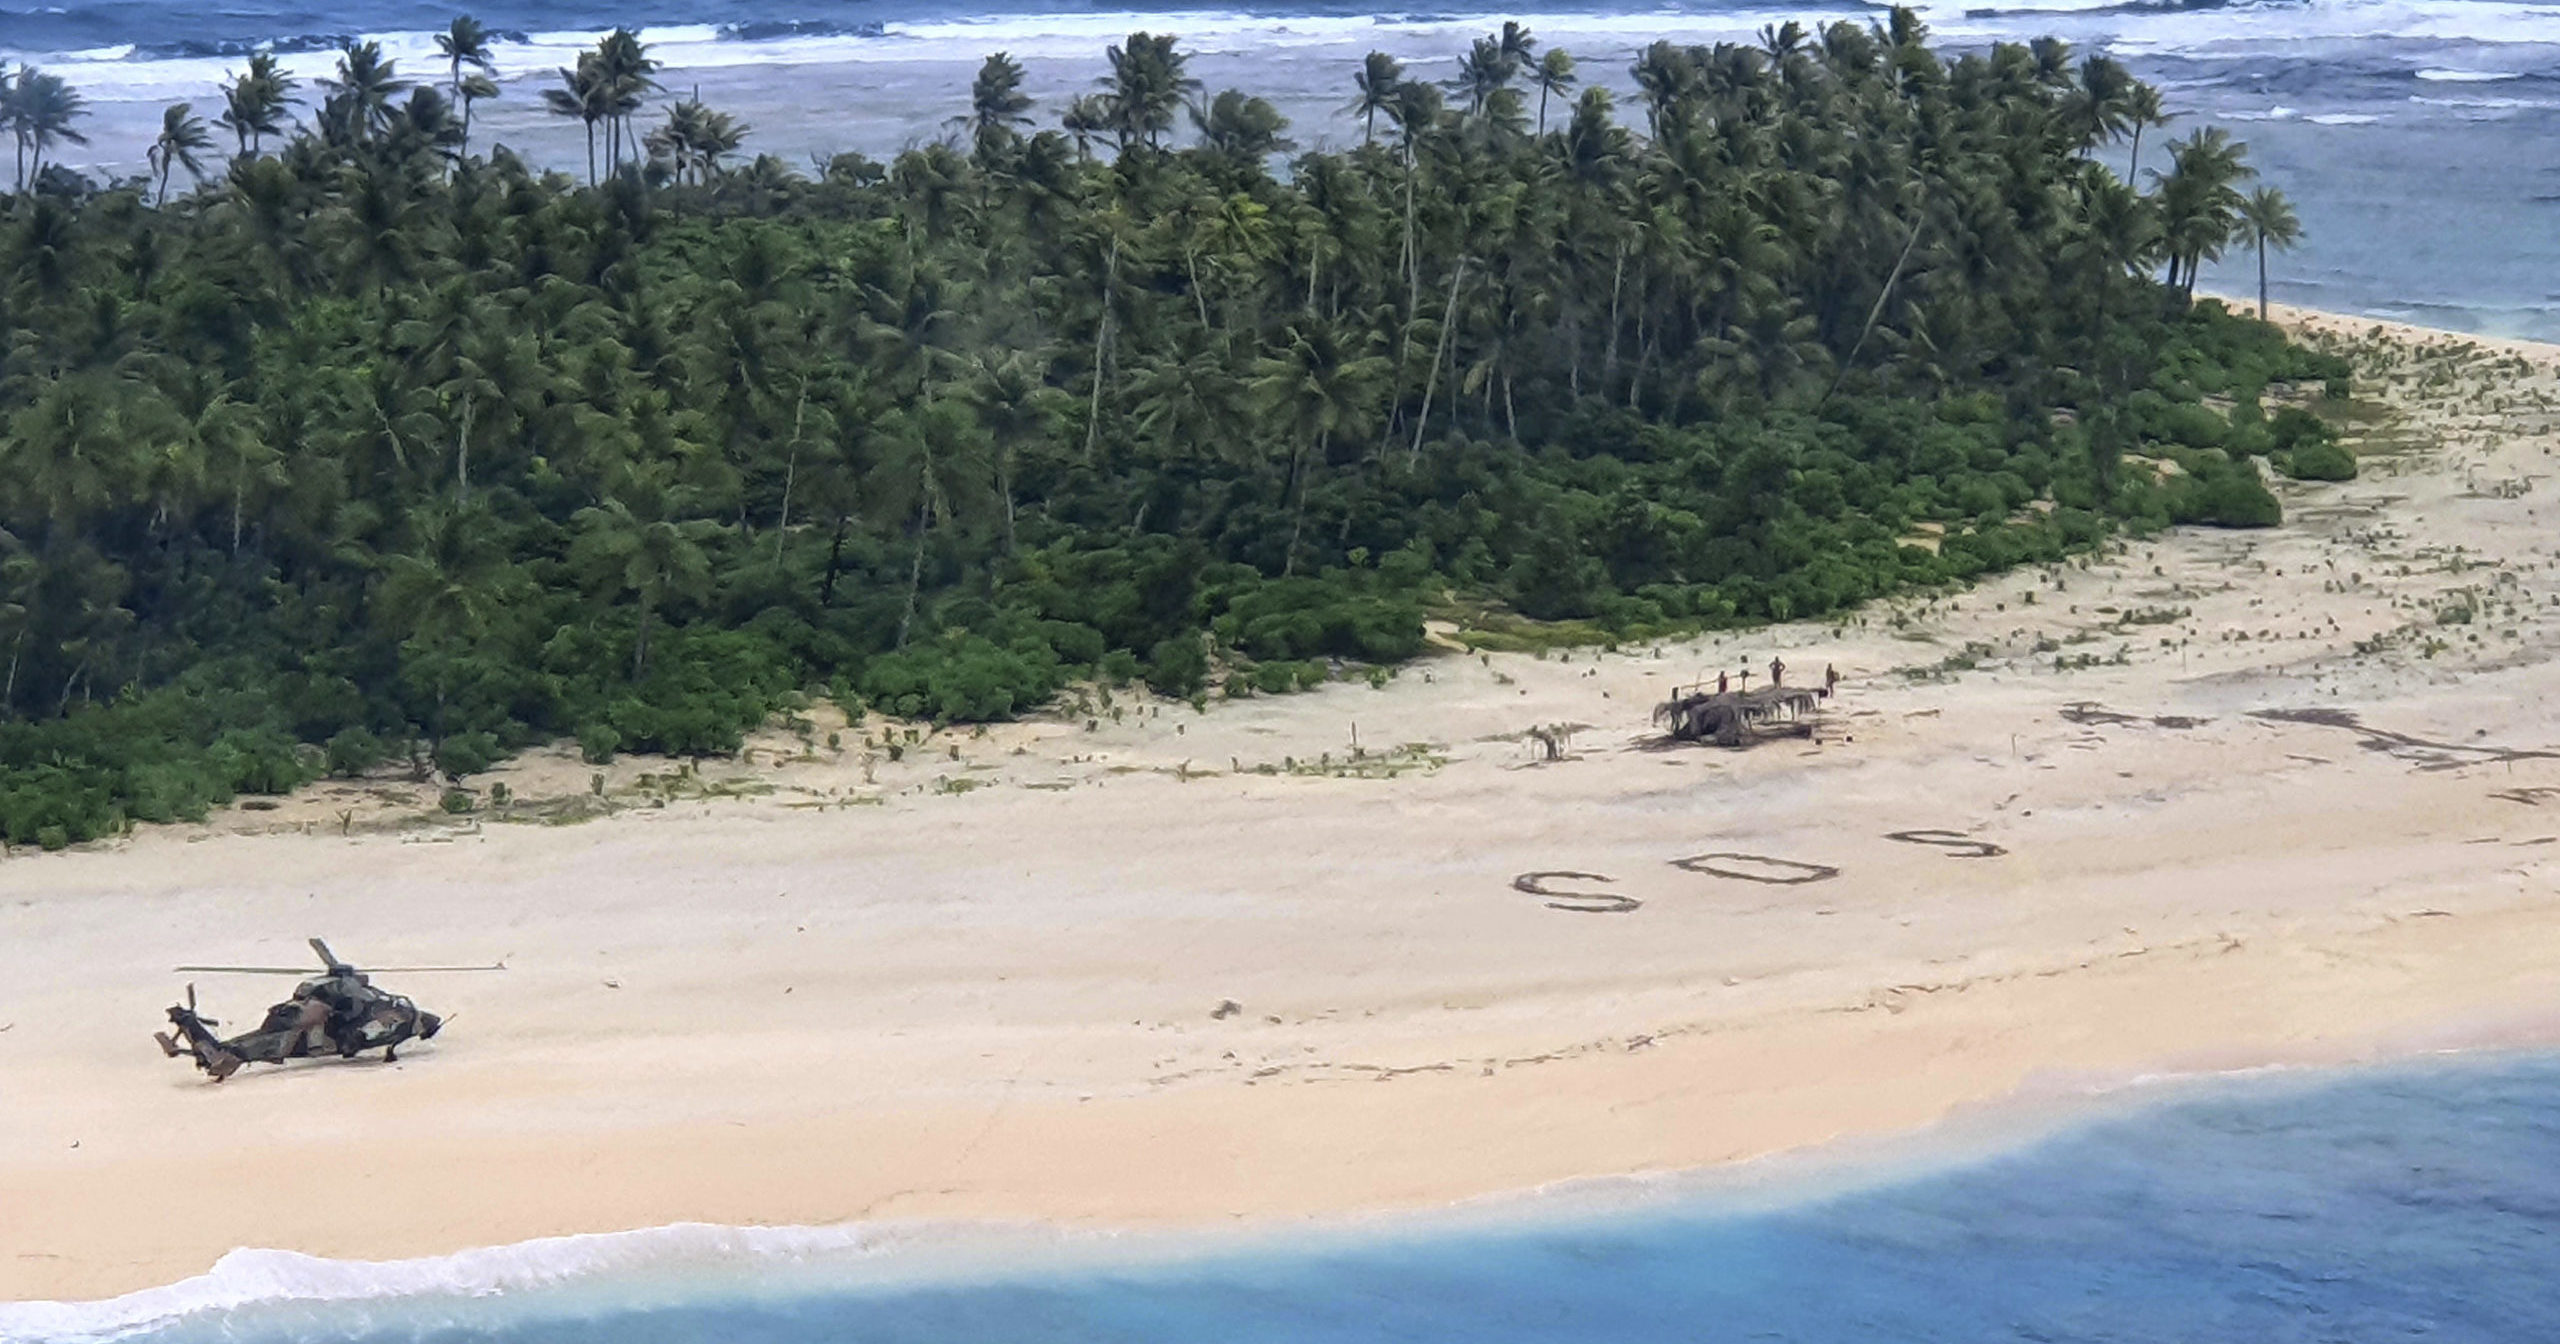 In this photo provided by the Australian Defence Force, an Australian Army helicopter lands on Pikelot Island in the Federated States of Micronesia, where three men were found on Aug. 2, 2020, safe and healthy after missing for three days.